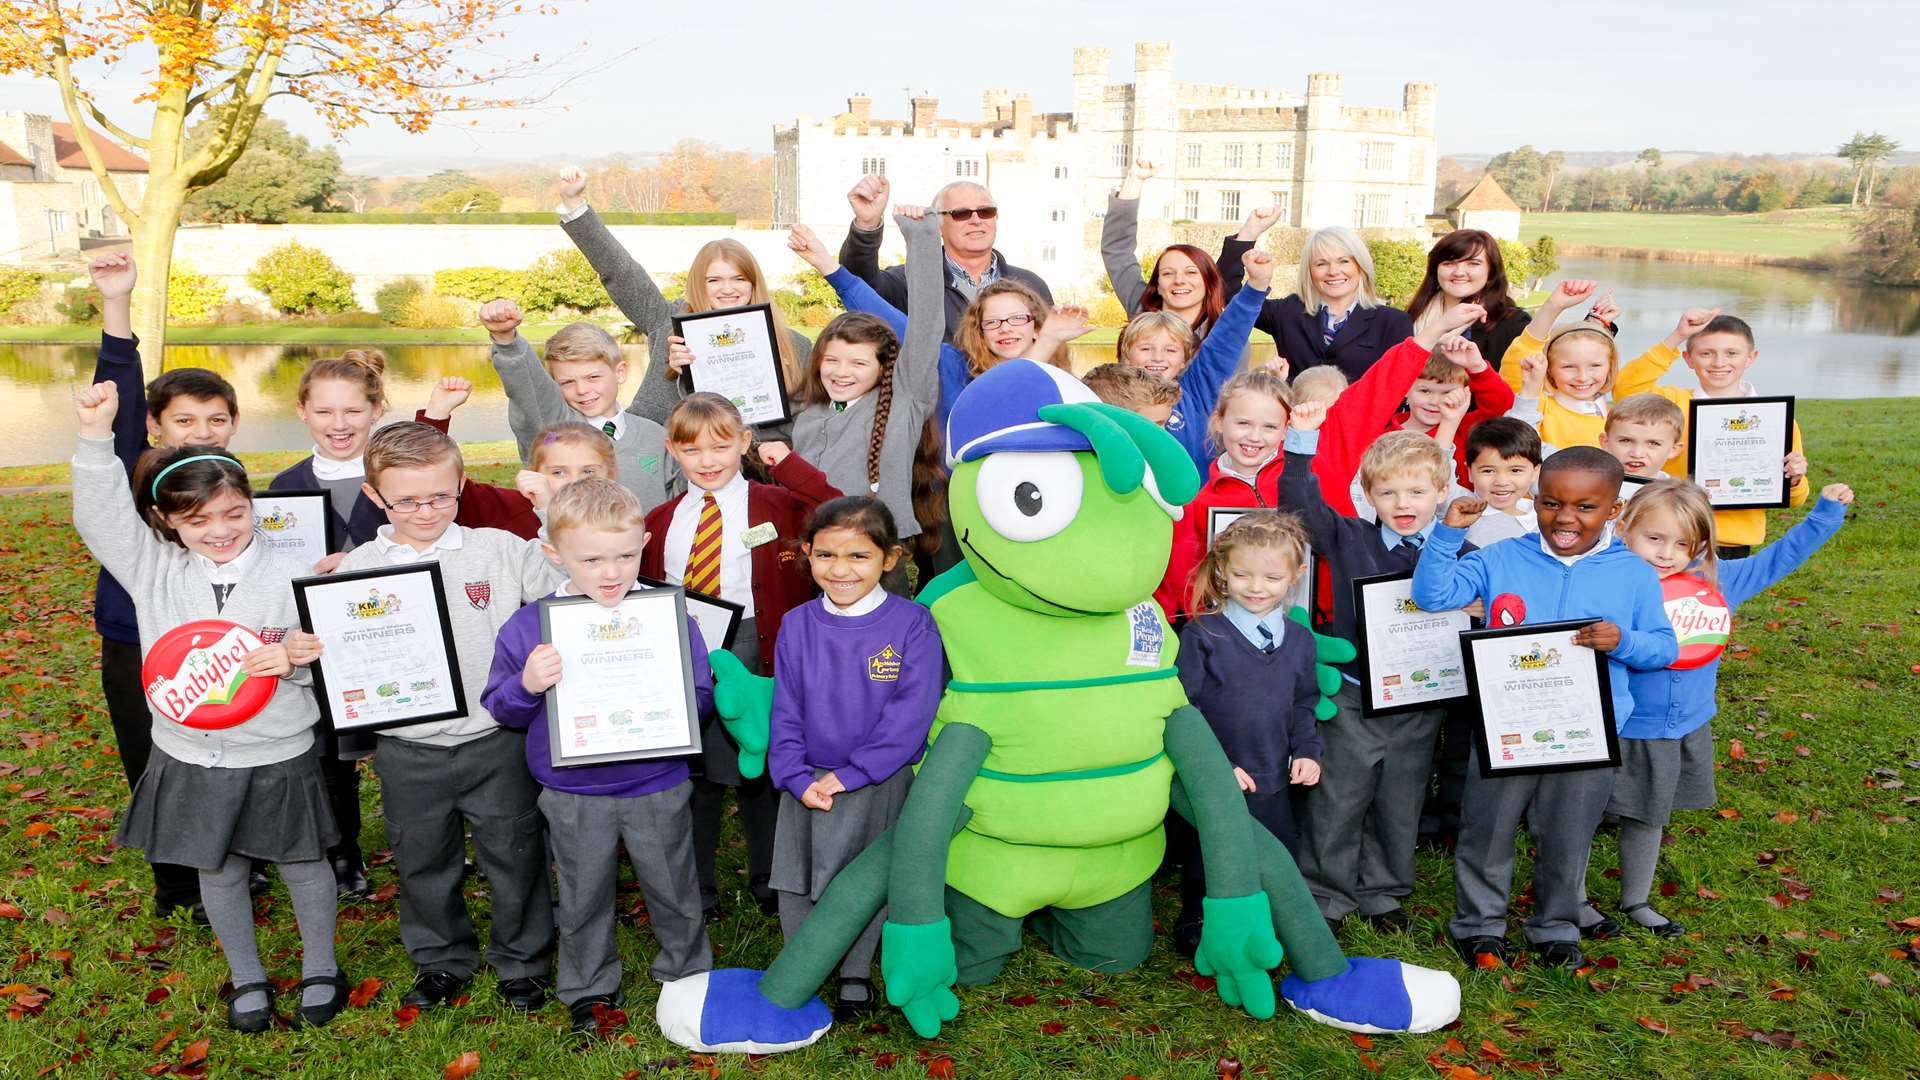 KM Walk to School Challenge Day presentations at Leeds Castle with key partners Hannah Lawrence from Leeds Castle, Paul Binnie from Medway Council, Amy Woods from Three R's Teacher Recruitment, Sara Williams from Specsavers and Catherine Underdown from KCC with pupils and mascot Buster Bug